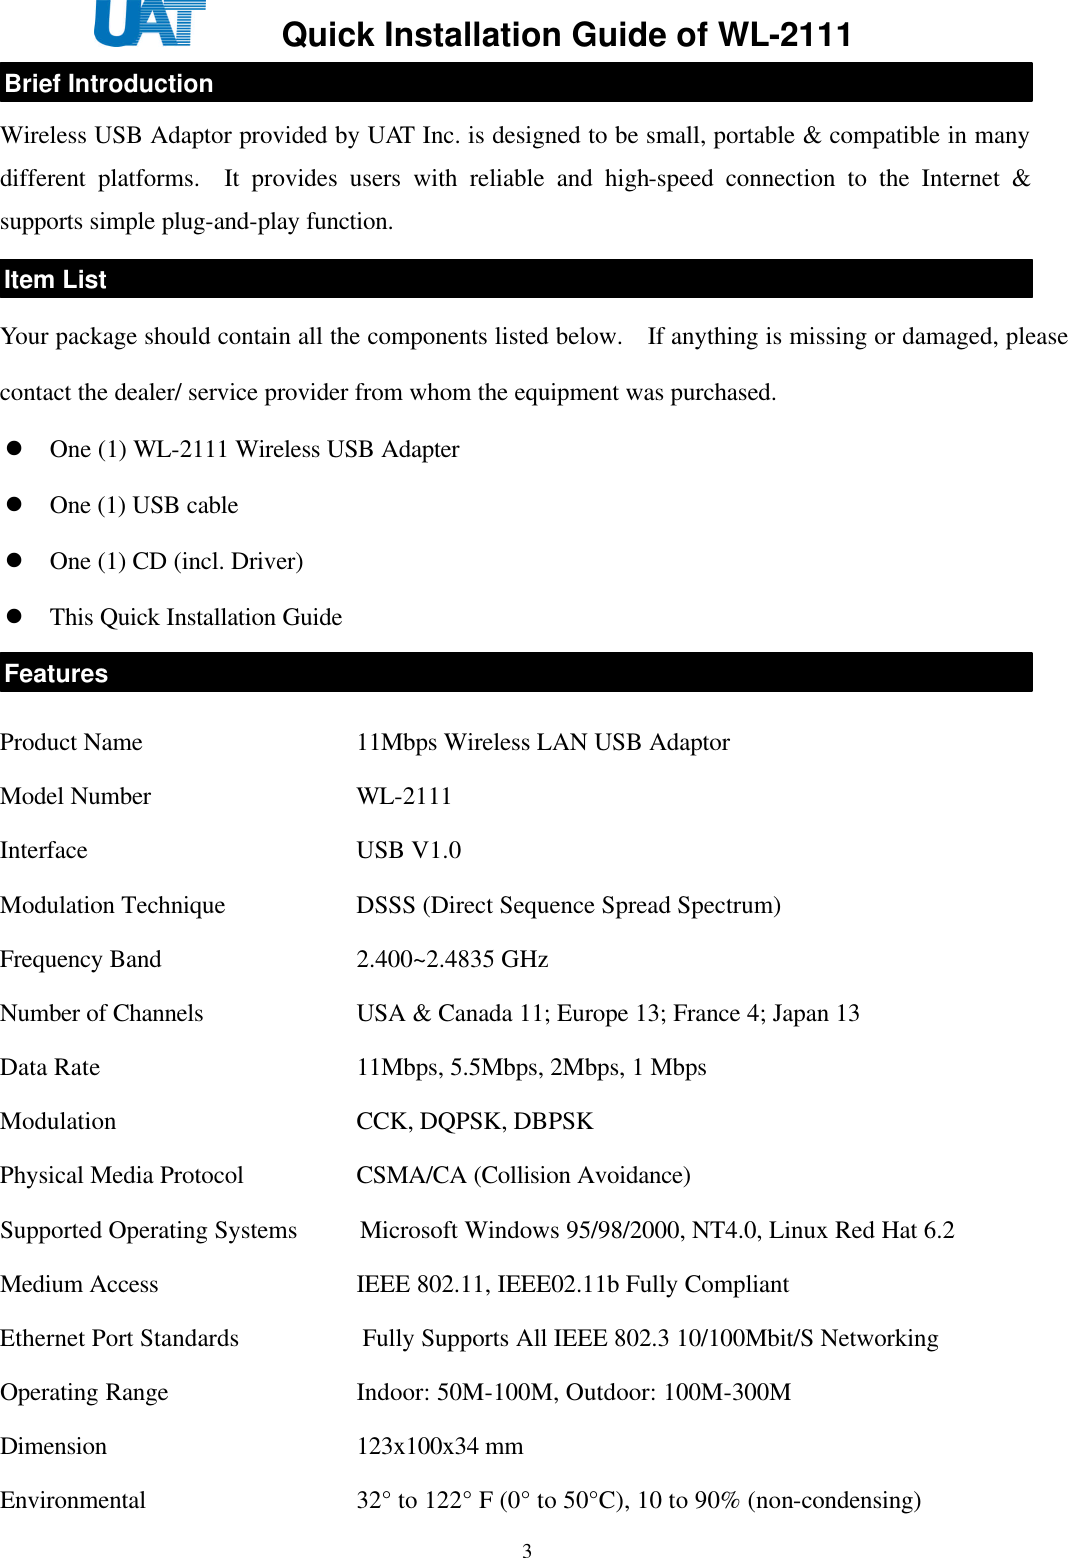     Quick Installation Guide of WL-2111    3 Wireless USB Adaptor provided by UAT Inc. is designed to be small, portable &amp; compatible in many different platforms.  It provides users with reliable and high-speed connection to the Internet &amp; supports simple plug-and-play function.     Your package should contain all the components listed below.  If anything is missing or damaged, please contact the dealer/ service provider from whom the equipment was purchased. l One (1) WL-2111 Wireless USB Adapter l One (1) USB cable l One (1) CD (incl. Driver) l This Quick Installation Guide -   Product Name     11Mbps Wireless LAN USB Adaptor Model Number     WL-2111 Interface       USB V1.0 Modulation Technique        DSSS (Direct Sequence Spread Spectrum)   Frequency Band     2.400~2.4835 GHz   Number of Channels    USA &amp; Canada 11; Europe 13; France 4; Japan 13 Data Rate      11Mbps, 5.5Mbps, 2Mbps, 1 Mbps   Modulation      CCK, DQPSK, DBPSK   Physical Media Protocol      CSMA/CA (Collision Avoidance)   Supported Operating Systems     Microsoft Windows 95/98/2000, NT4.0, Linux Red Hat 6.2   Medium Access     IEEE 802.11, IEEE02.11b Fully Compliant      Ethernet Port Standards                   Fully Supports All IEEE 802.3 10/100Mbit/S Networking   Operating Range     Indoor: 50M-100M, Outdoor: 100M-300M   Dimension      123x100x34 mm   Environmental     32° to 122° F (0° to 50°C), 10 to 90% (non-condensing)   Brief Introduction Item List Features 